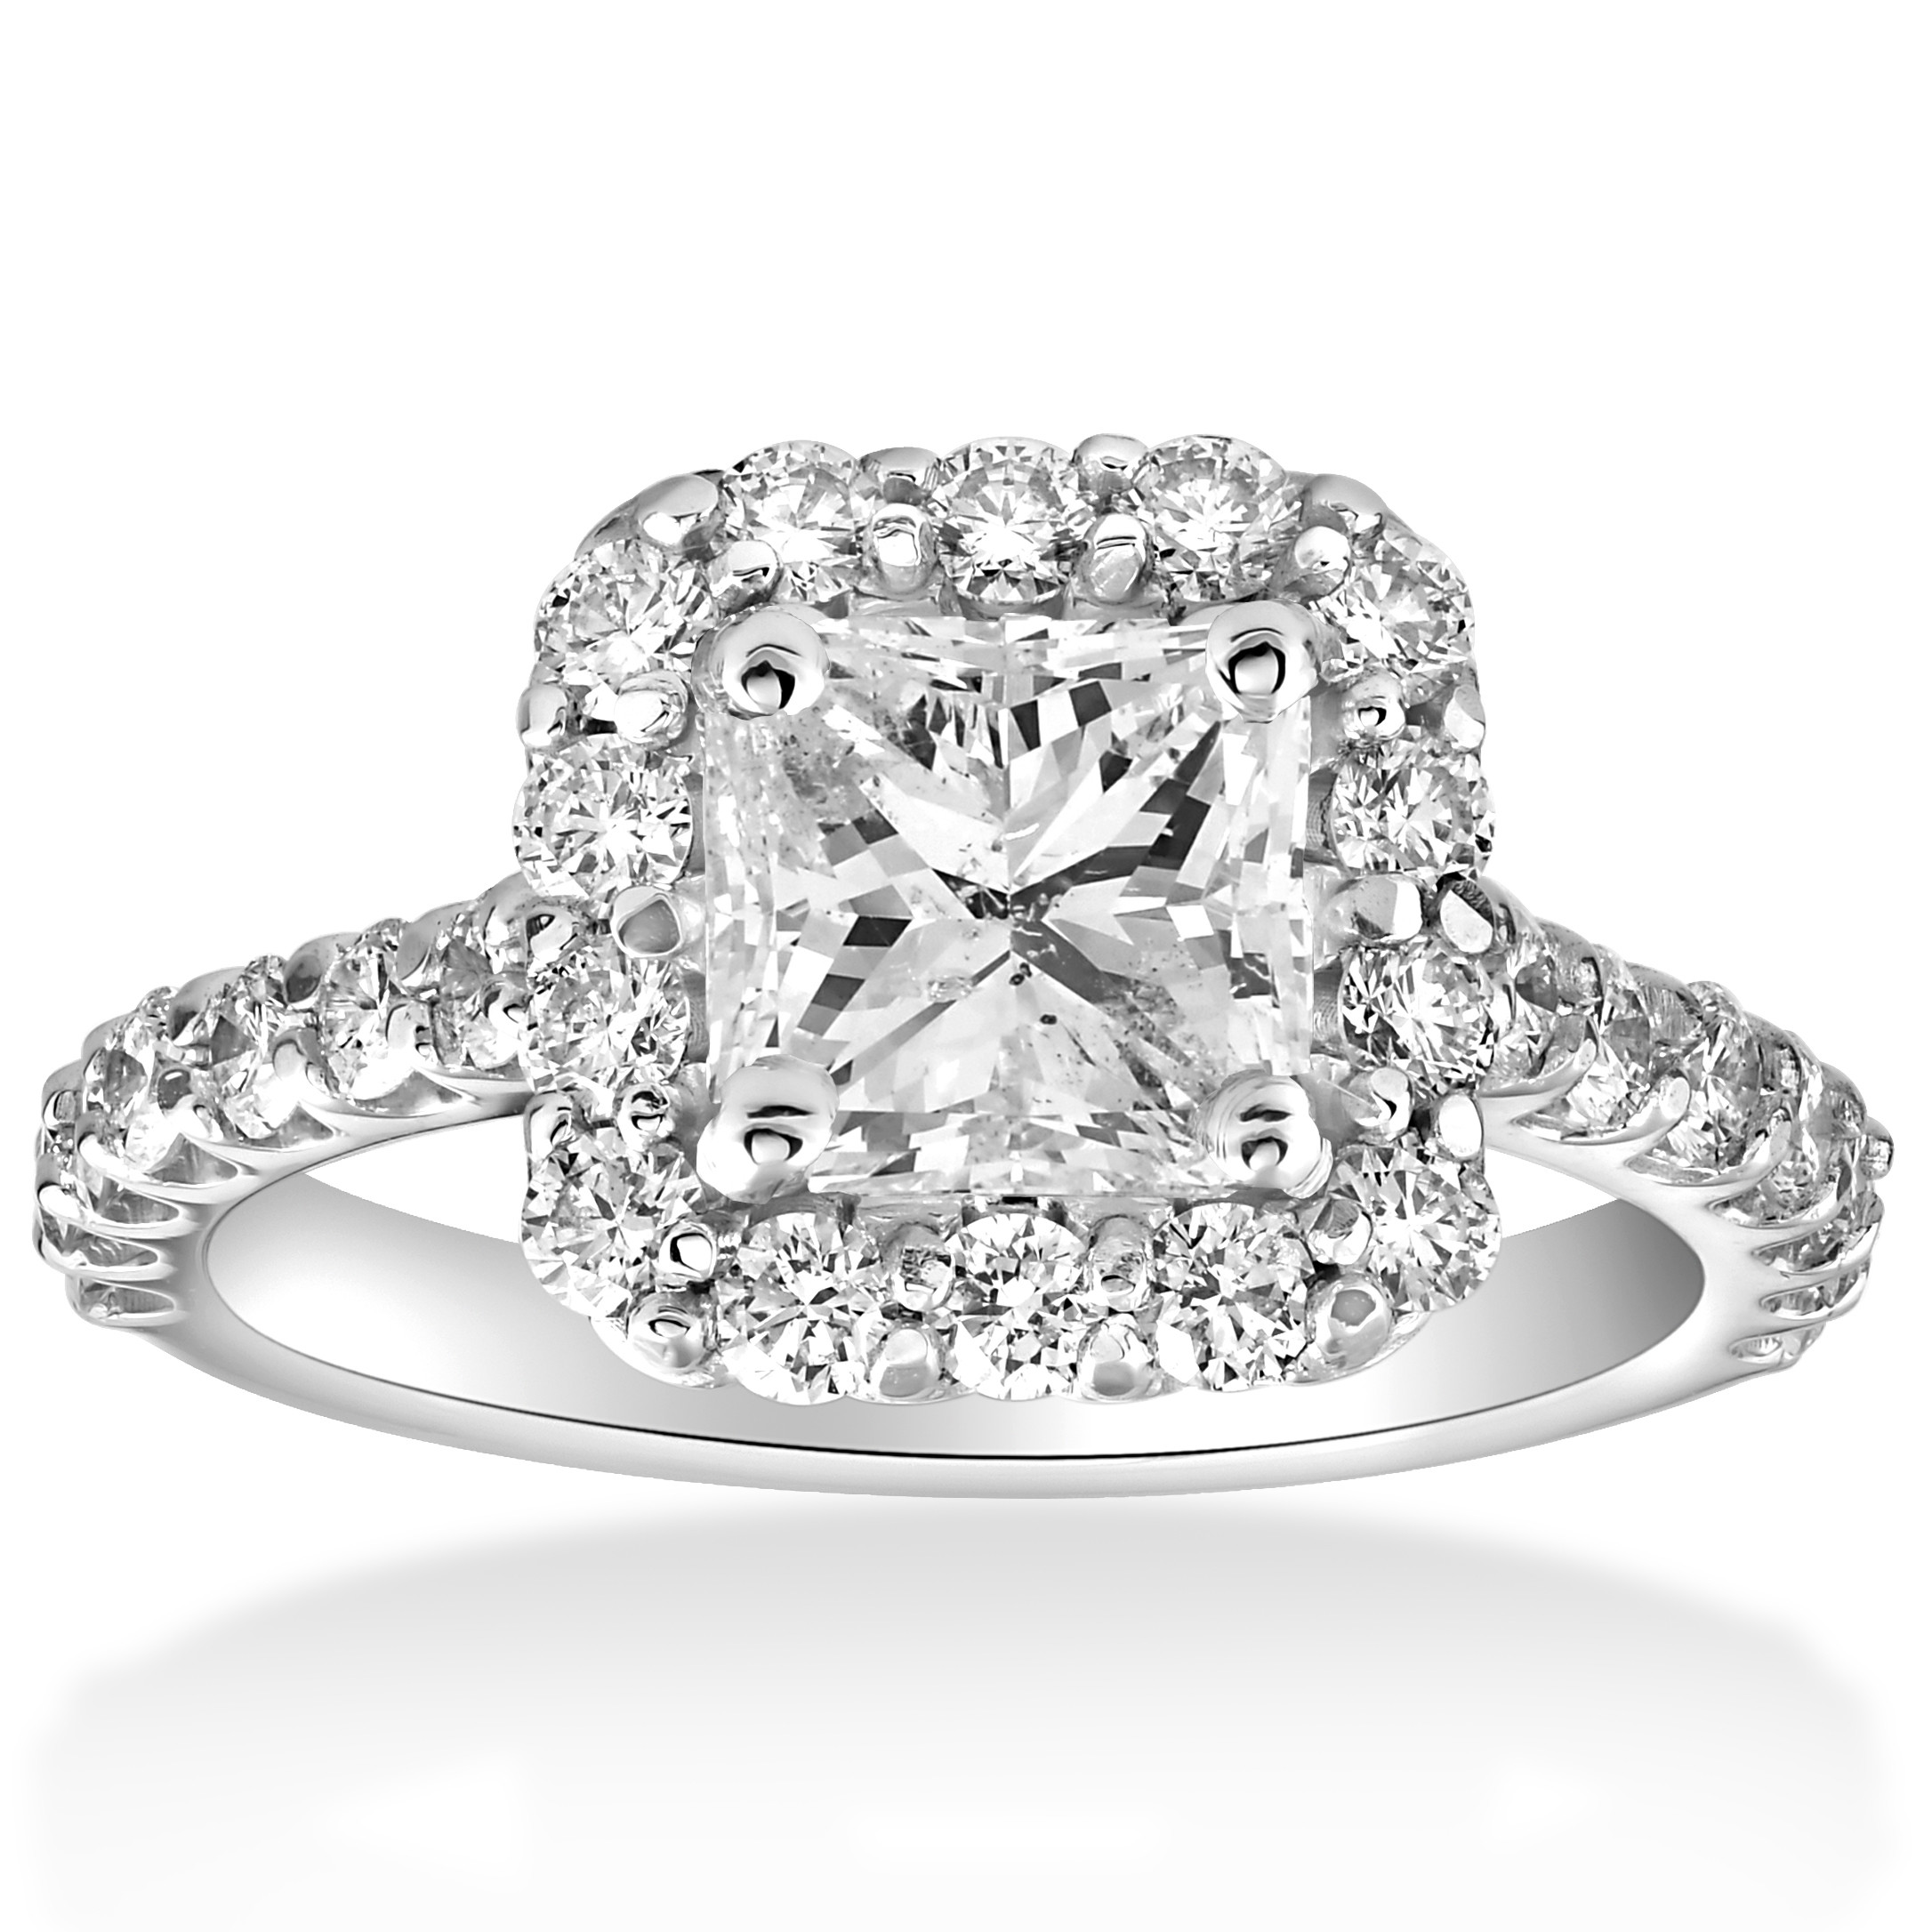 Princess Cut With Halo Engagement Rings
 2 cttw Halo Princess Cut Solitaire Diamond Engagement Ring